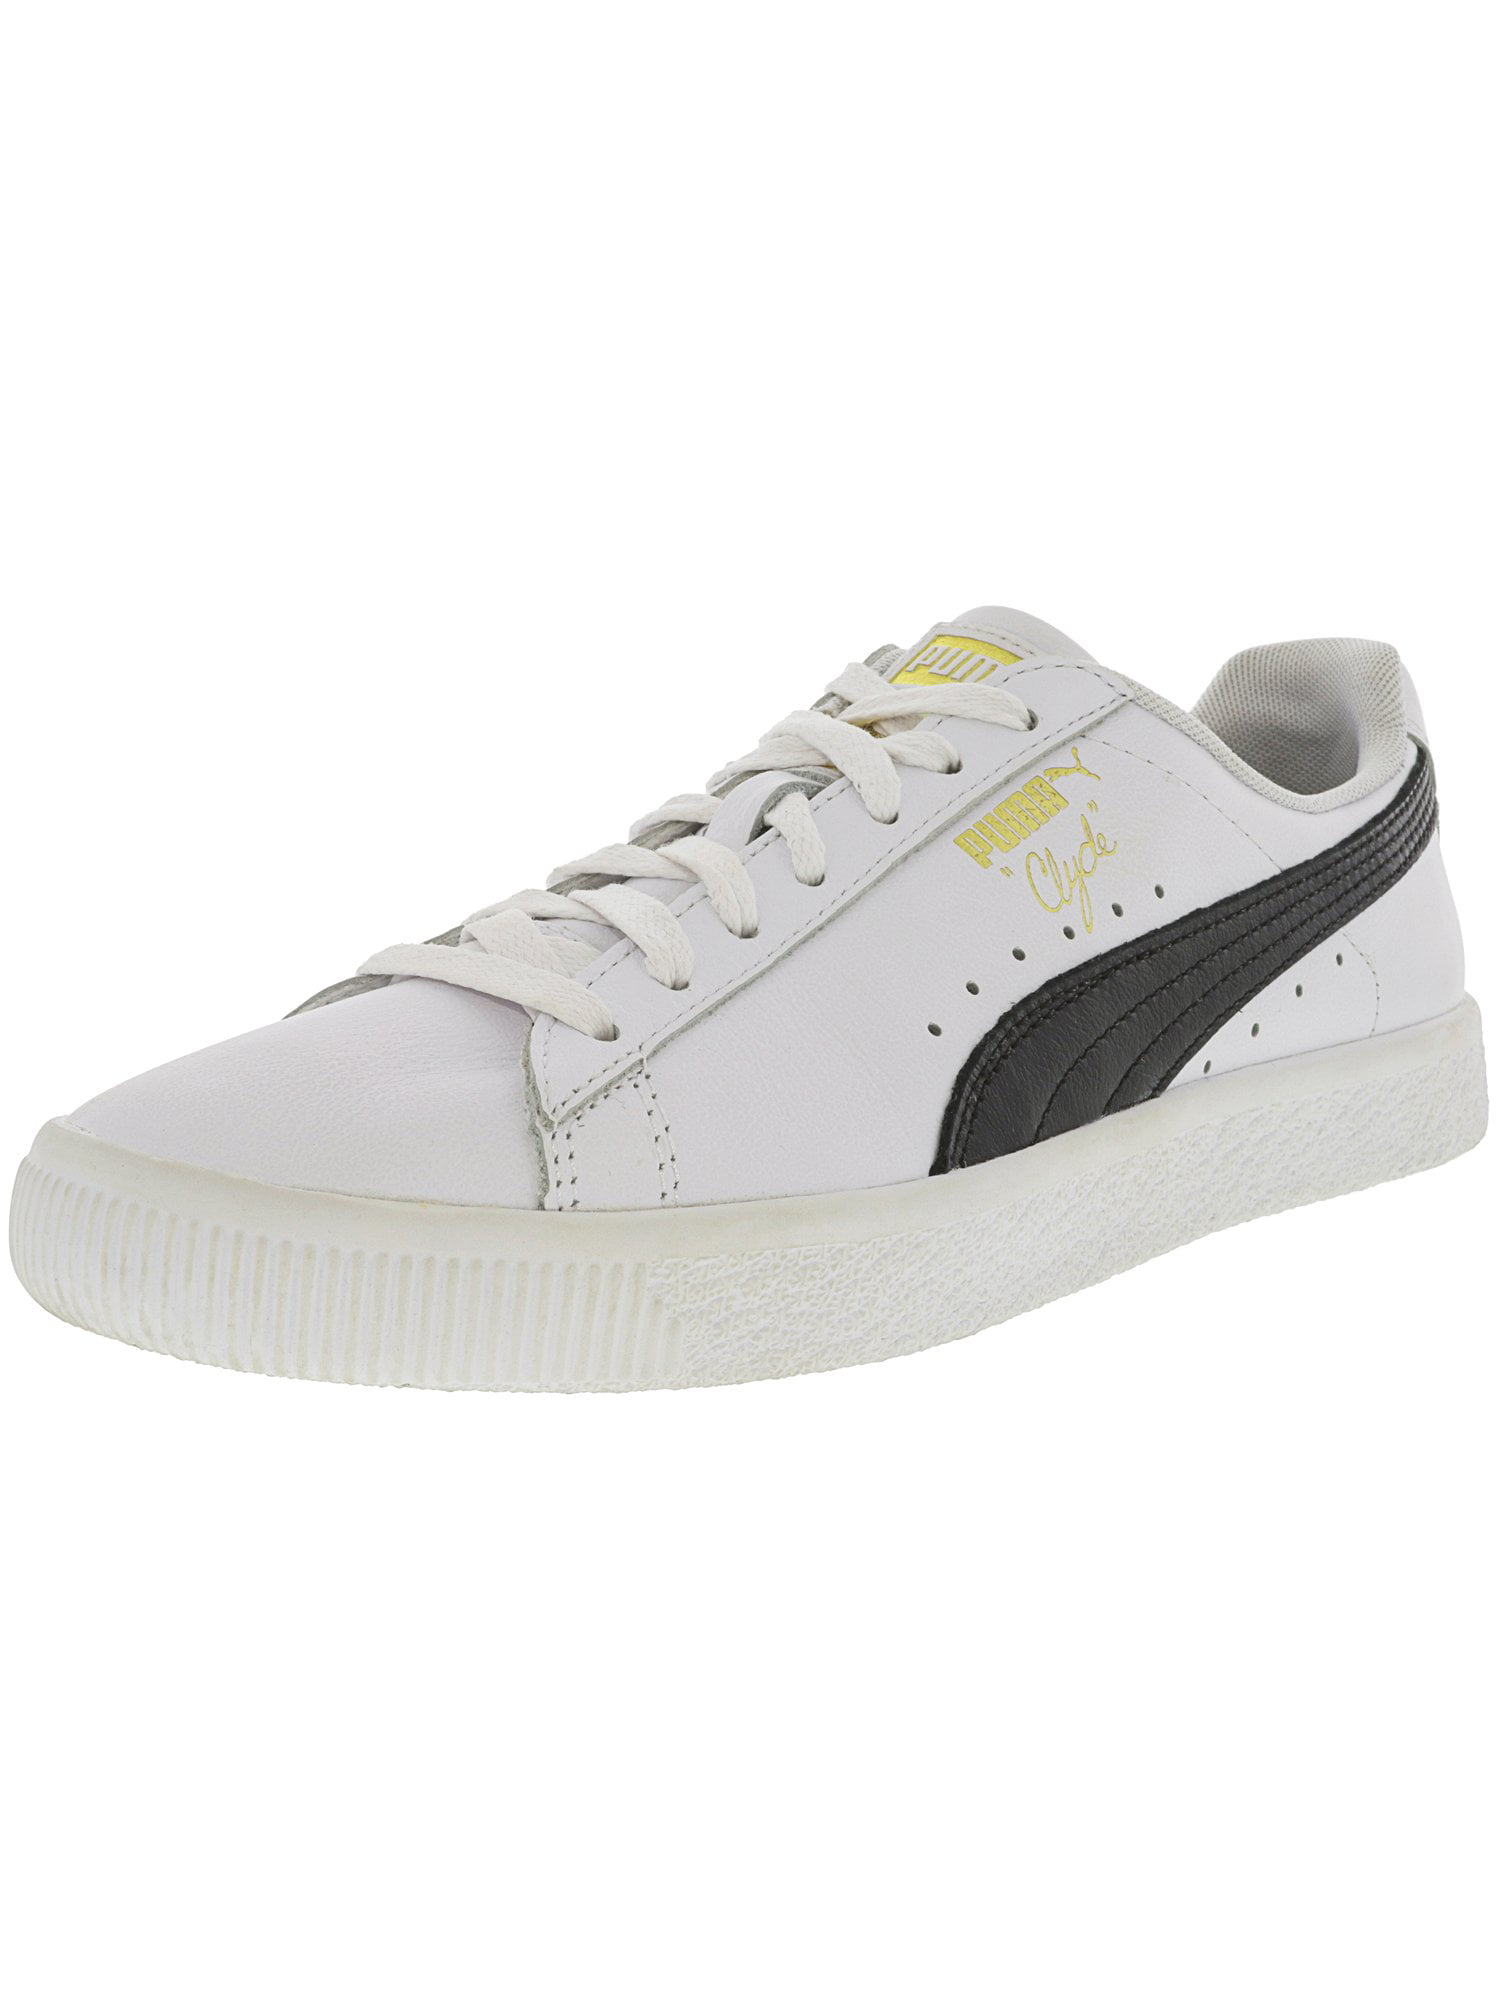 puma clyde leather men's casual shoes